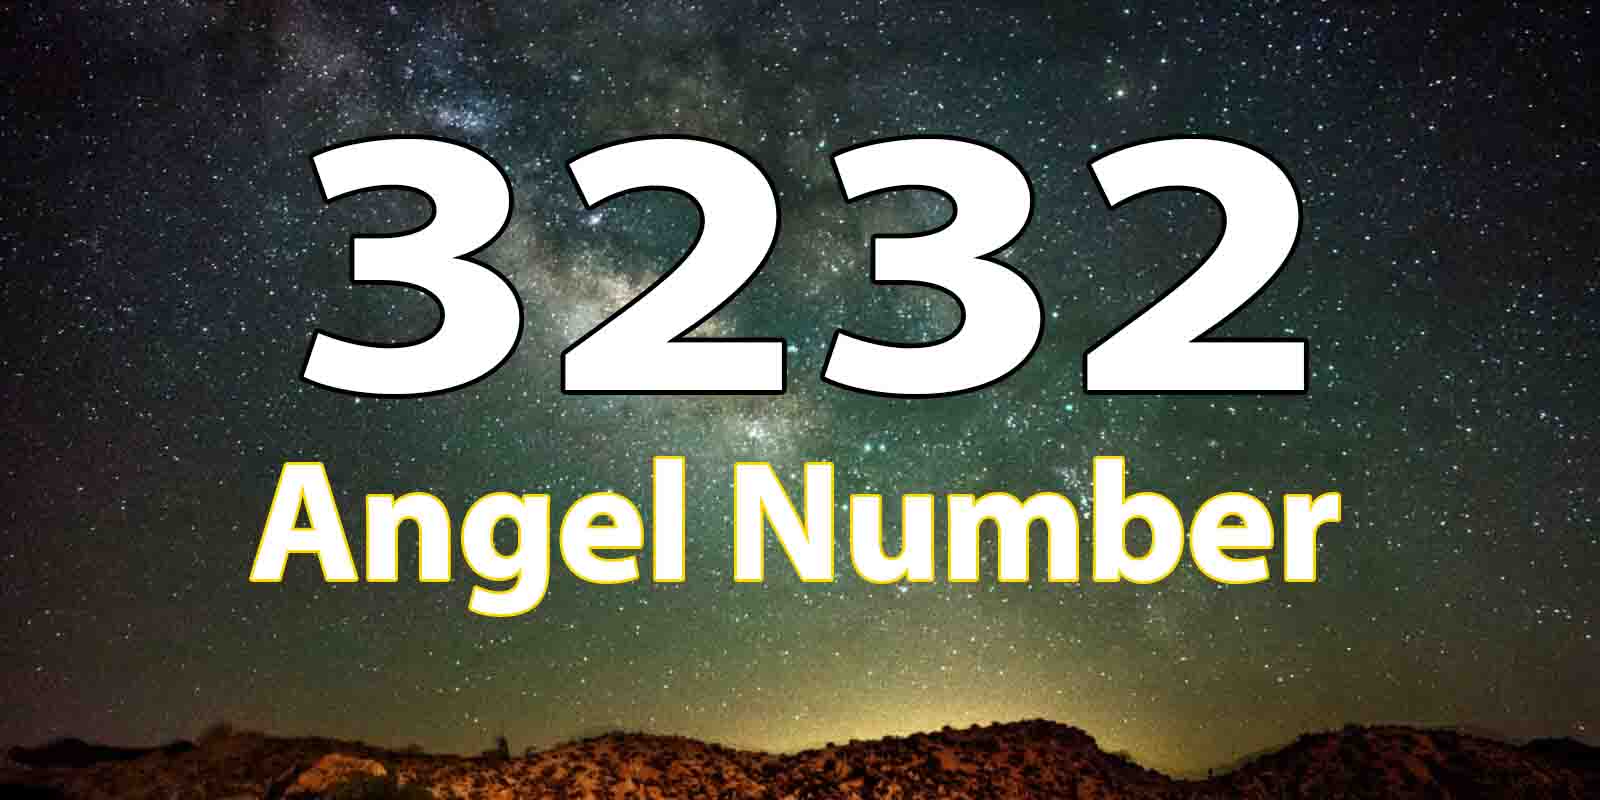 3232 Angel Number Meaning